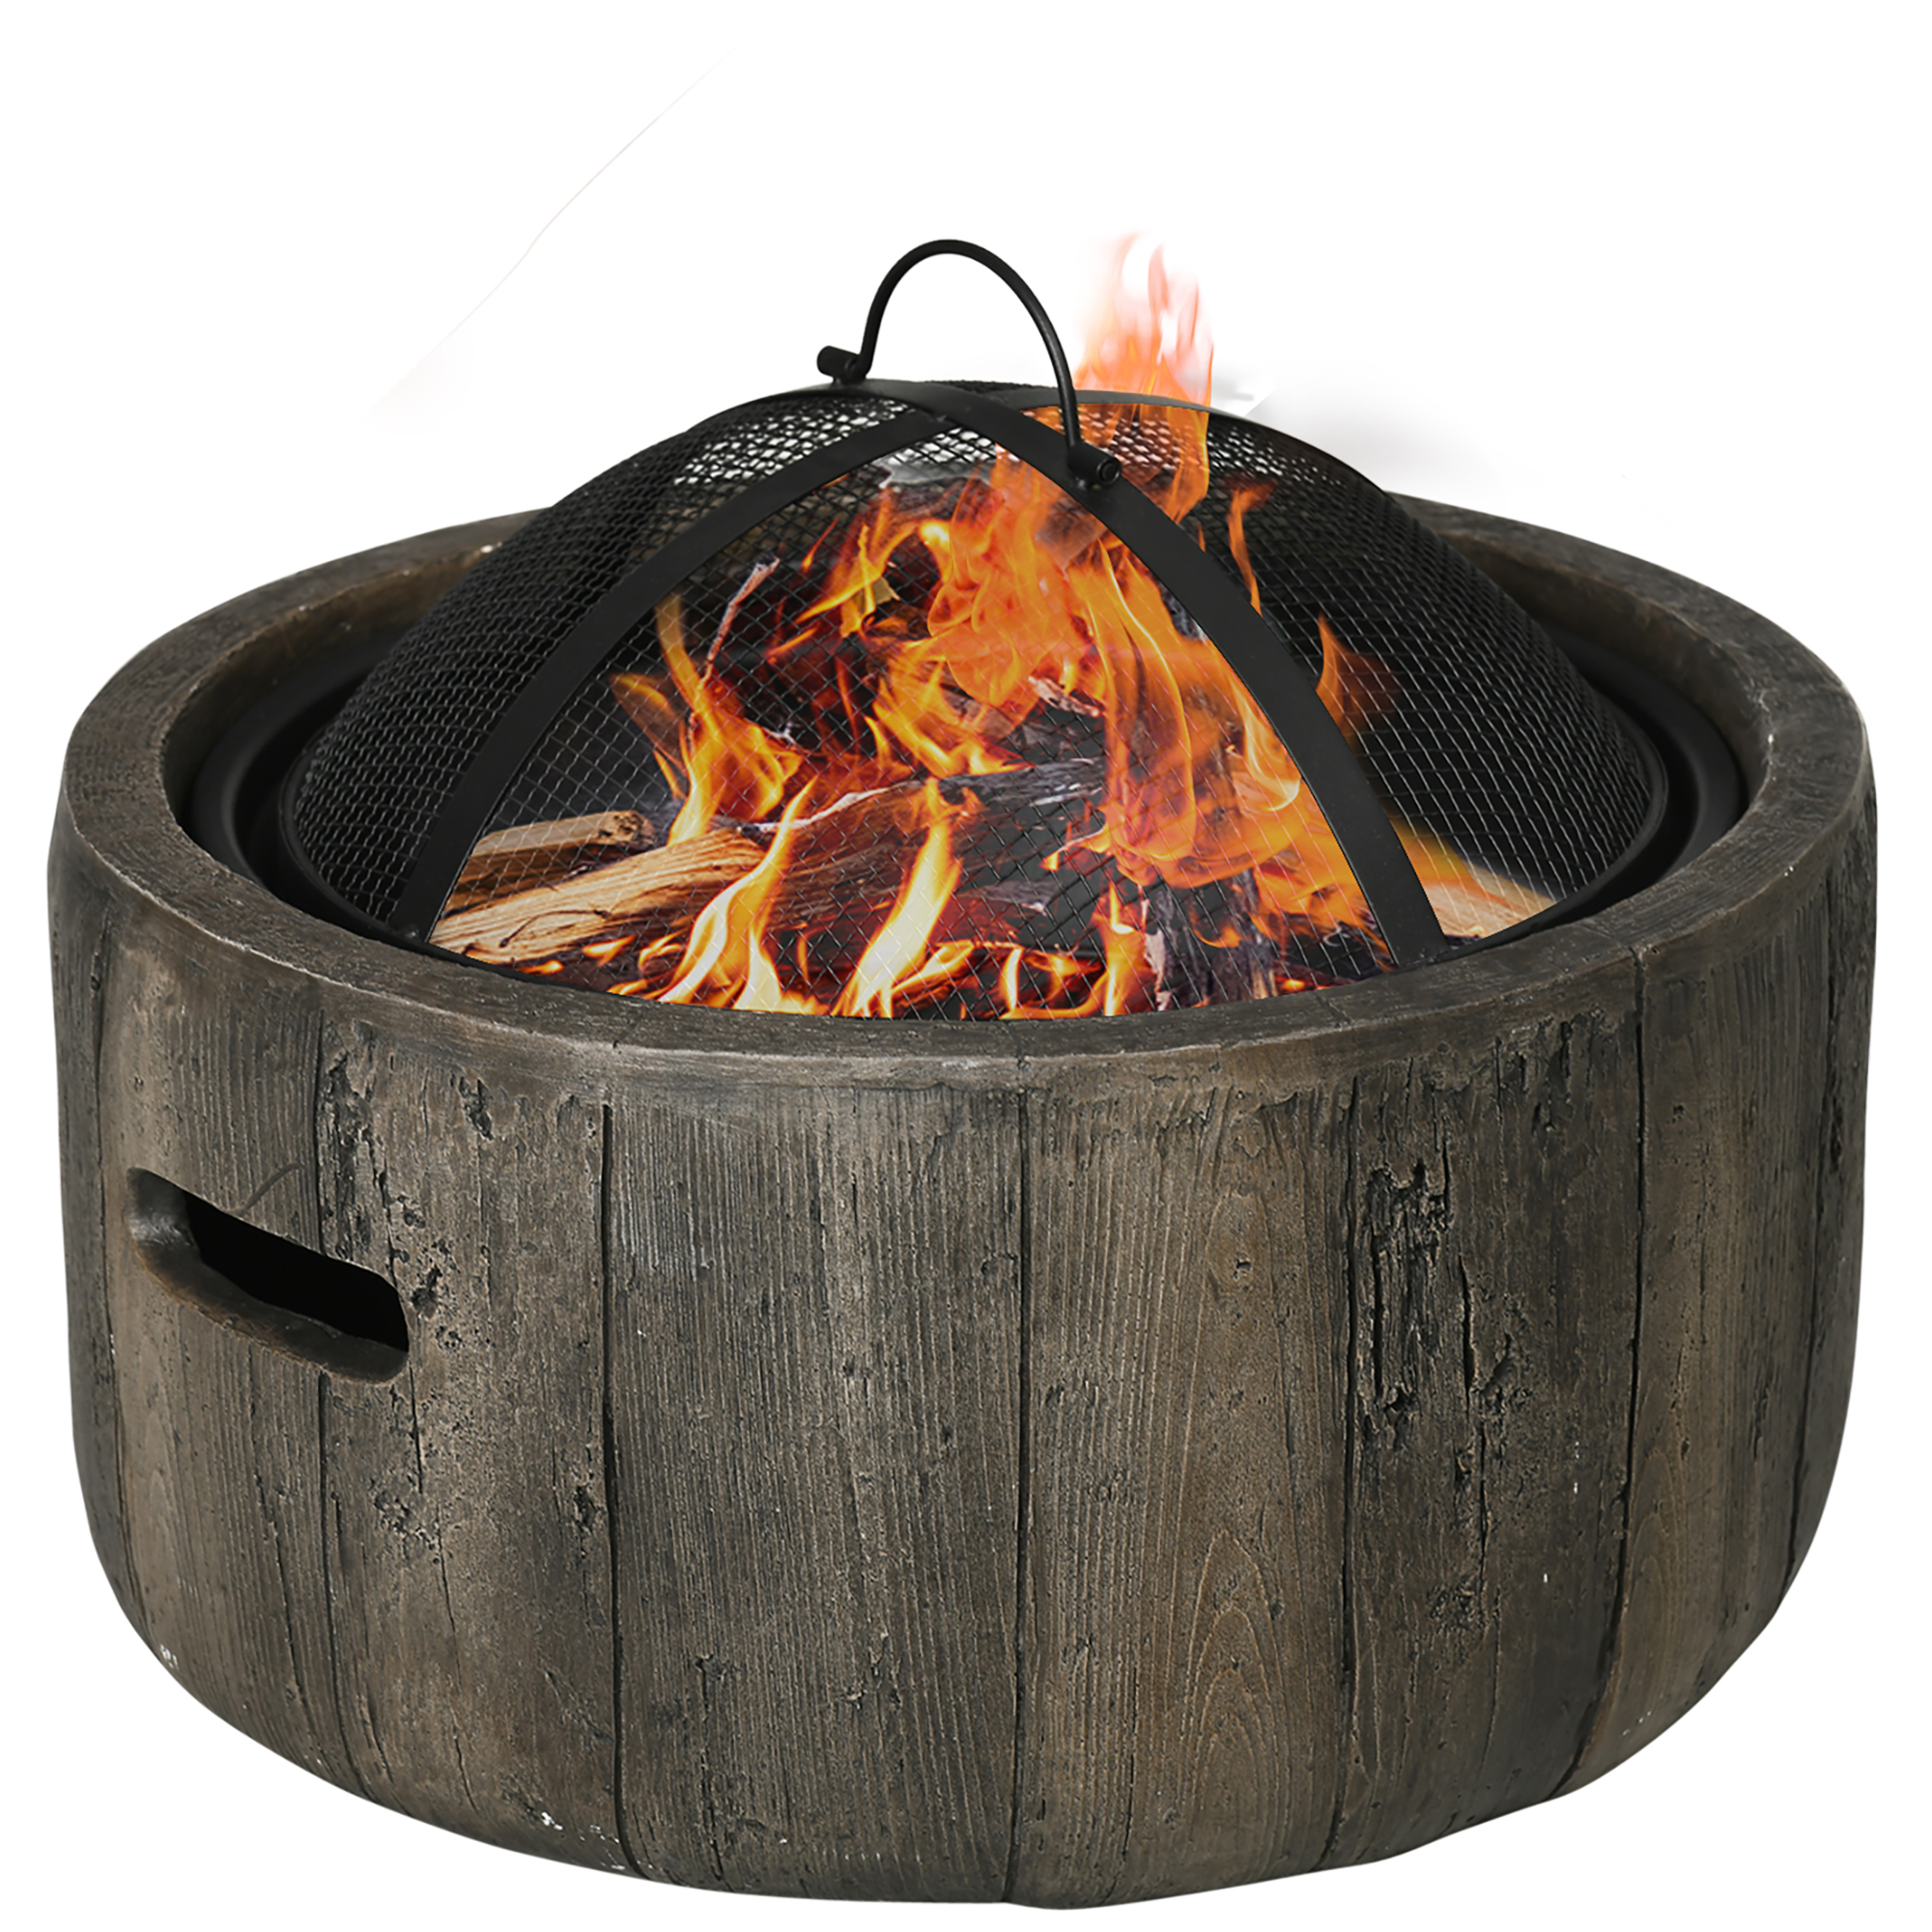 Outsunny Fire Pit with Spark Screen and Poker, 18" Wood-burning Bowl, Brown - image 1 of 9